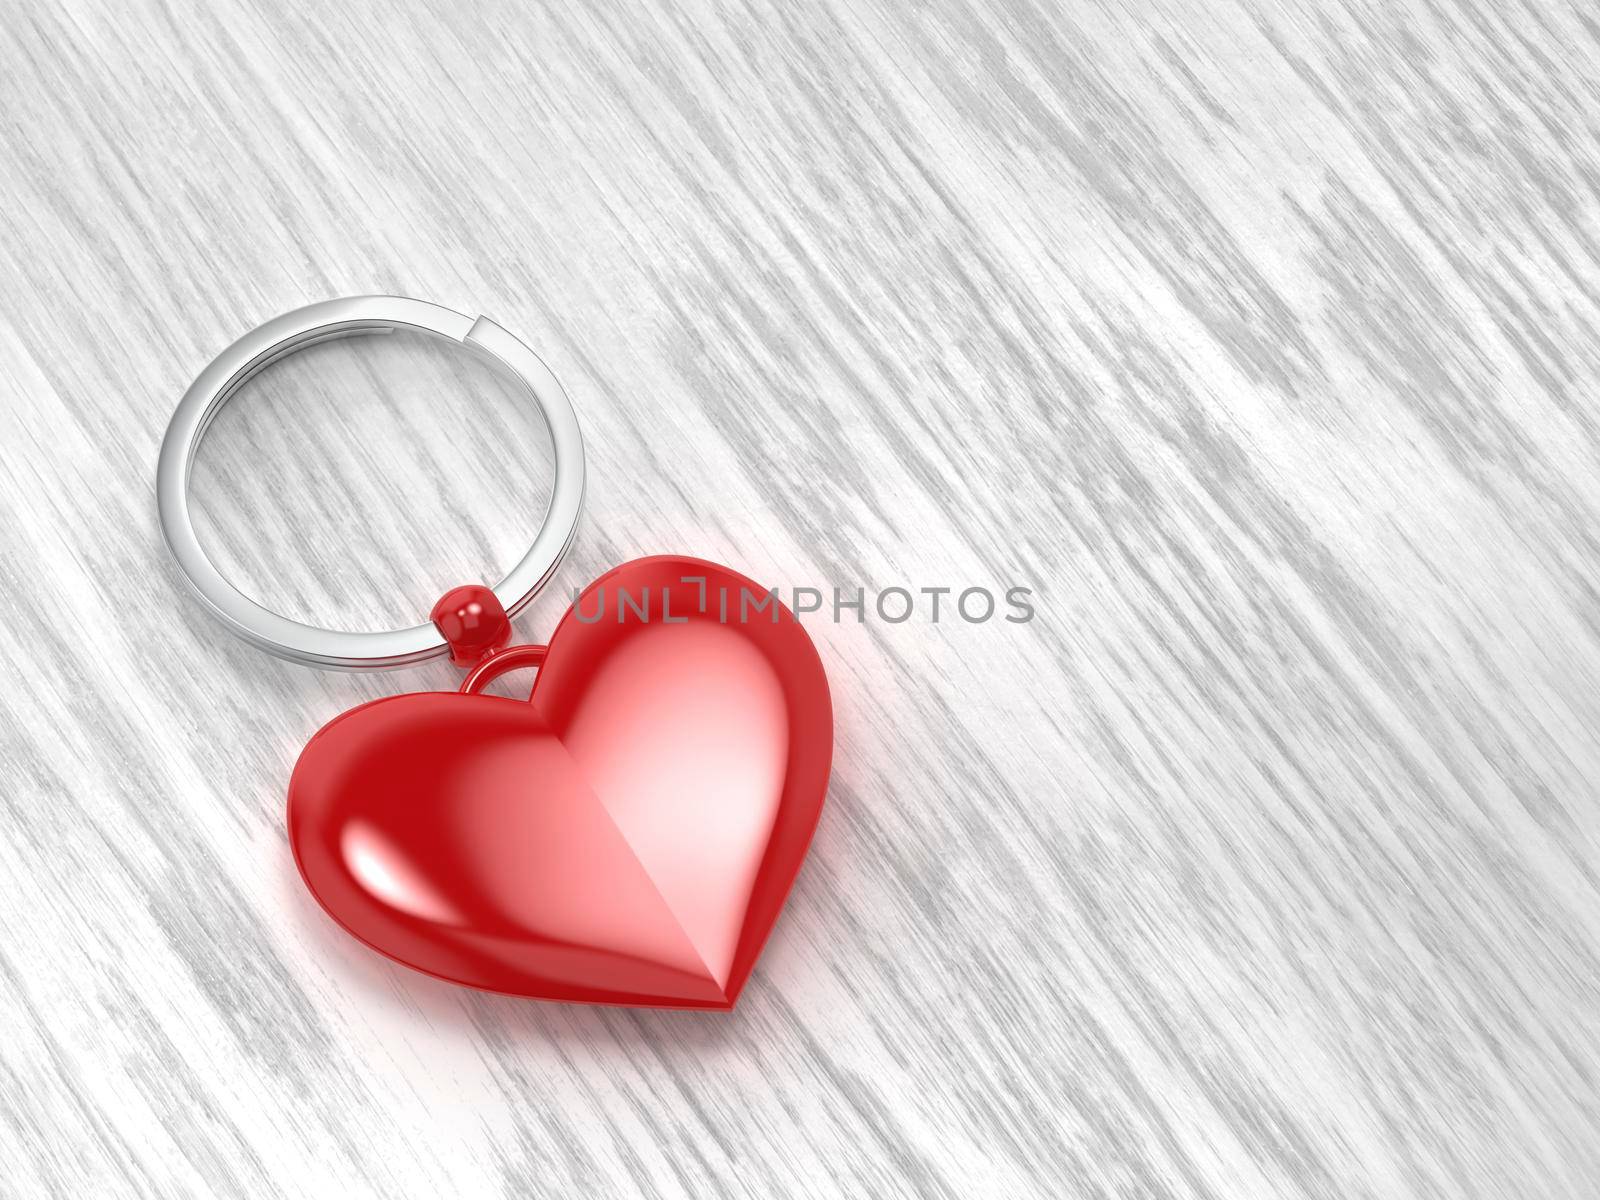 Keyring with shiny red heart
 by magraphics